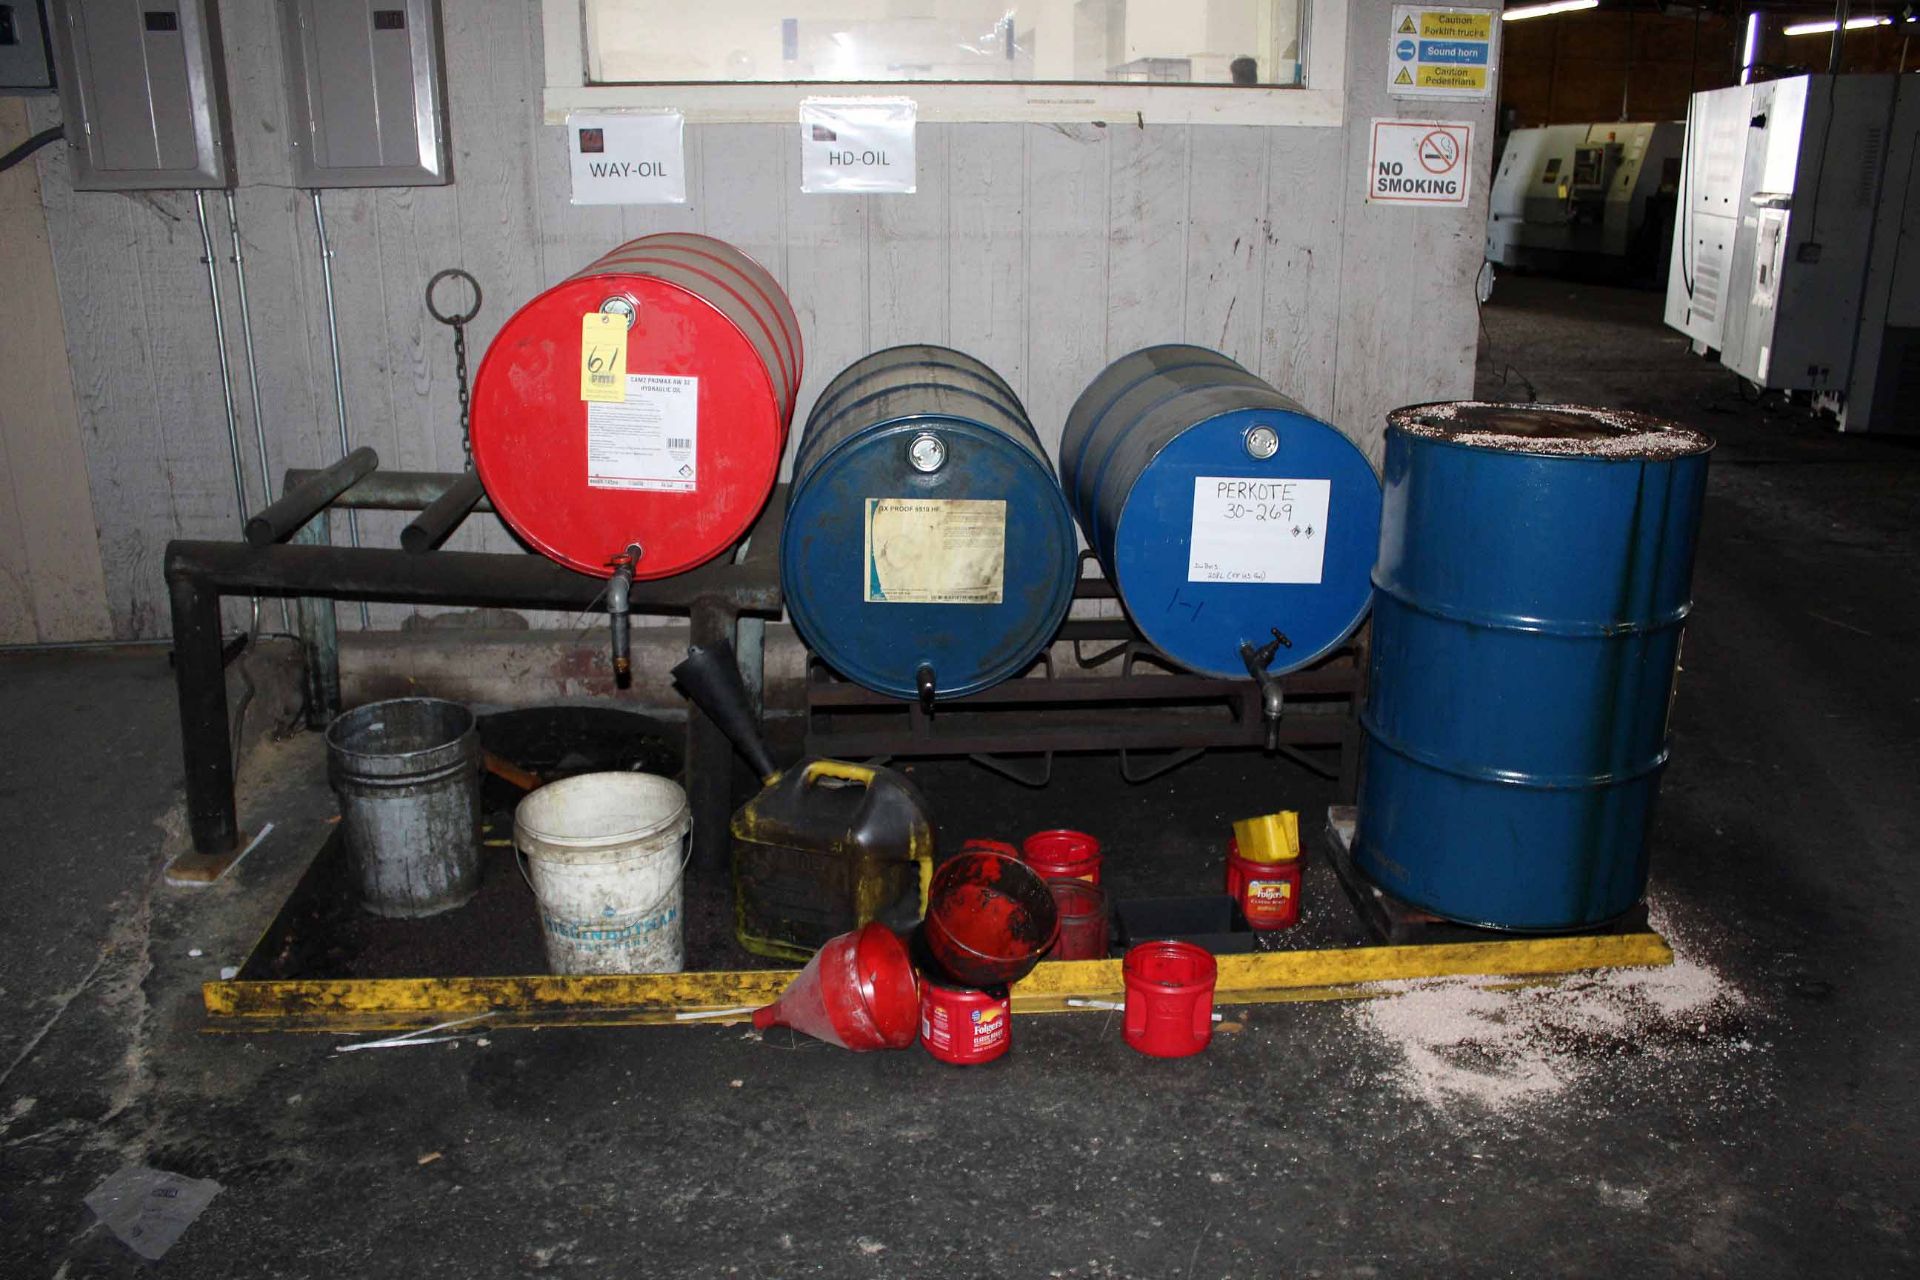 LOT OF 50 GAL. DRUMS CONSISTING OF: way oil, hyd. oil, perkote w/containment skid